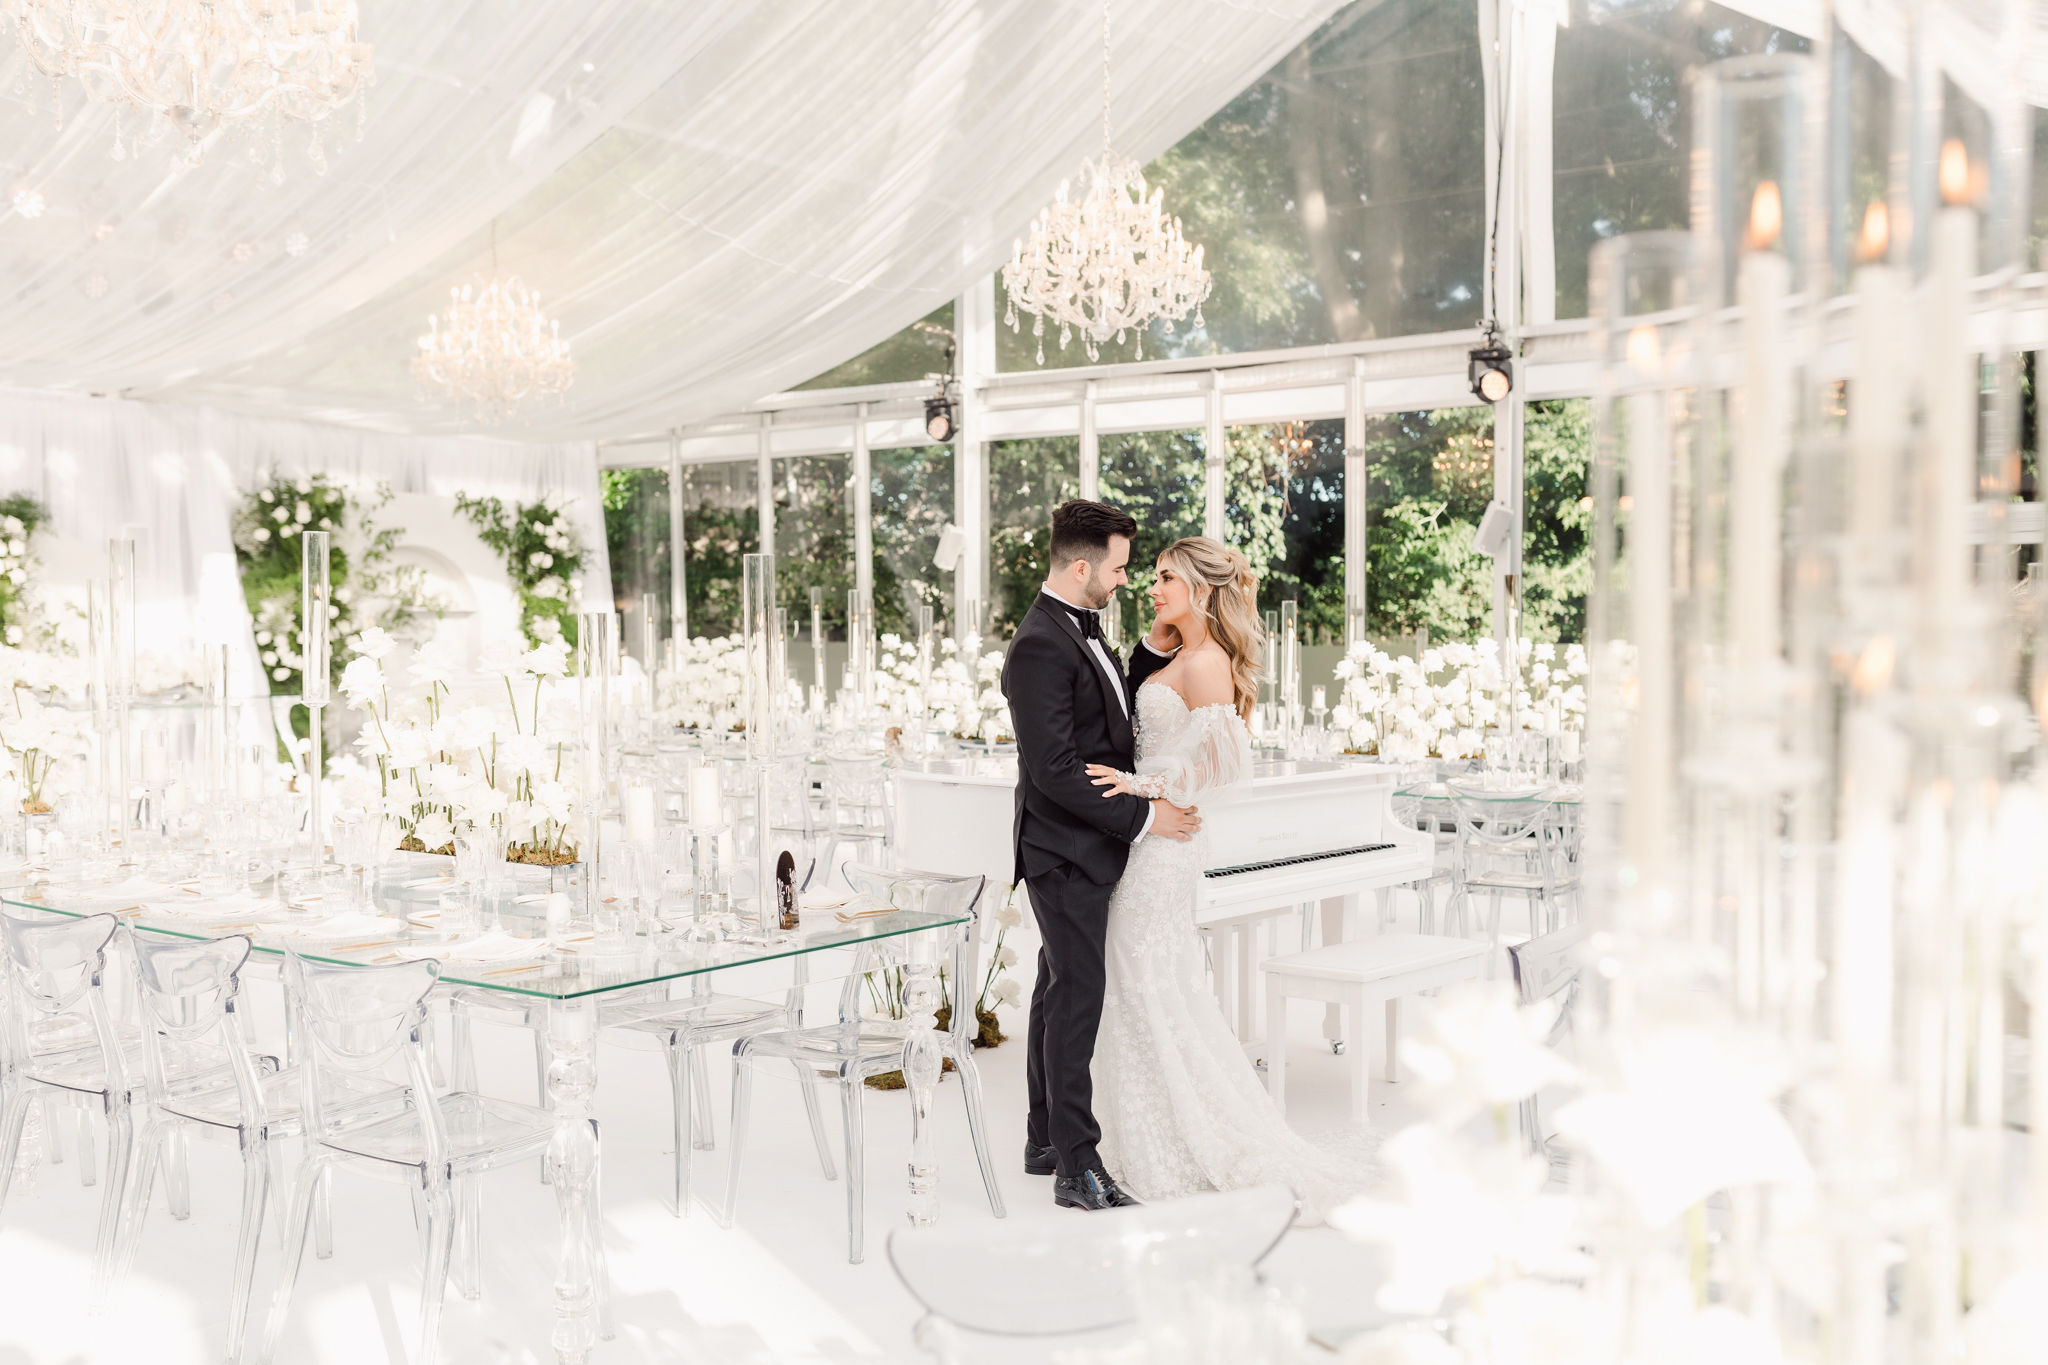 A Garden of 3000 White Roses at this Casa Loma Wedding